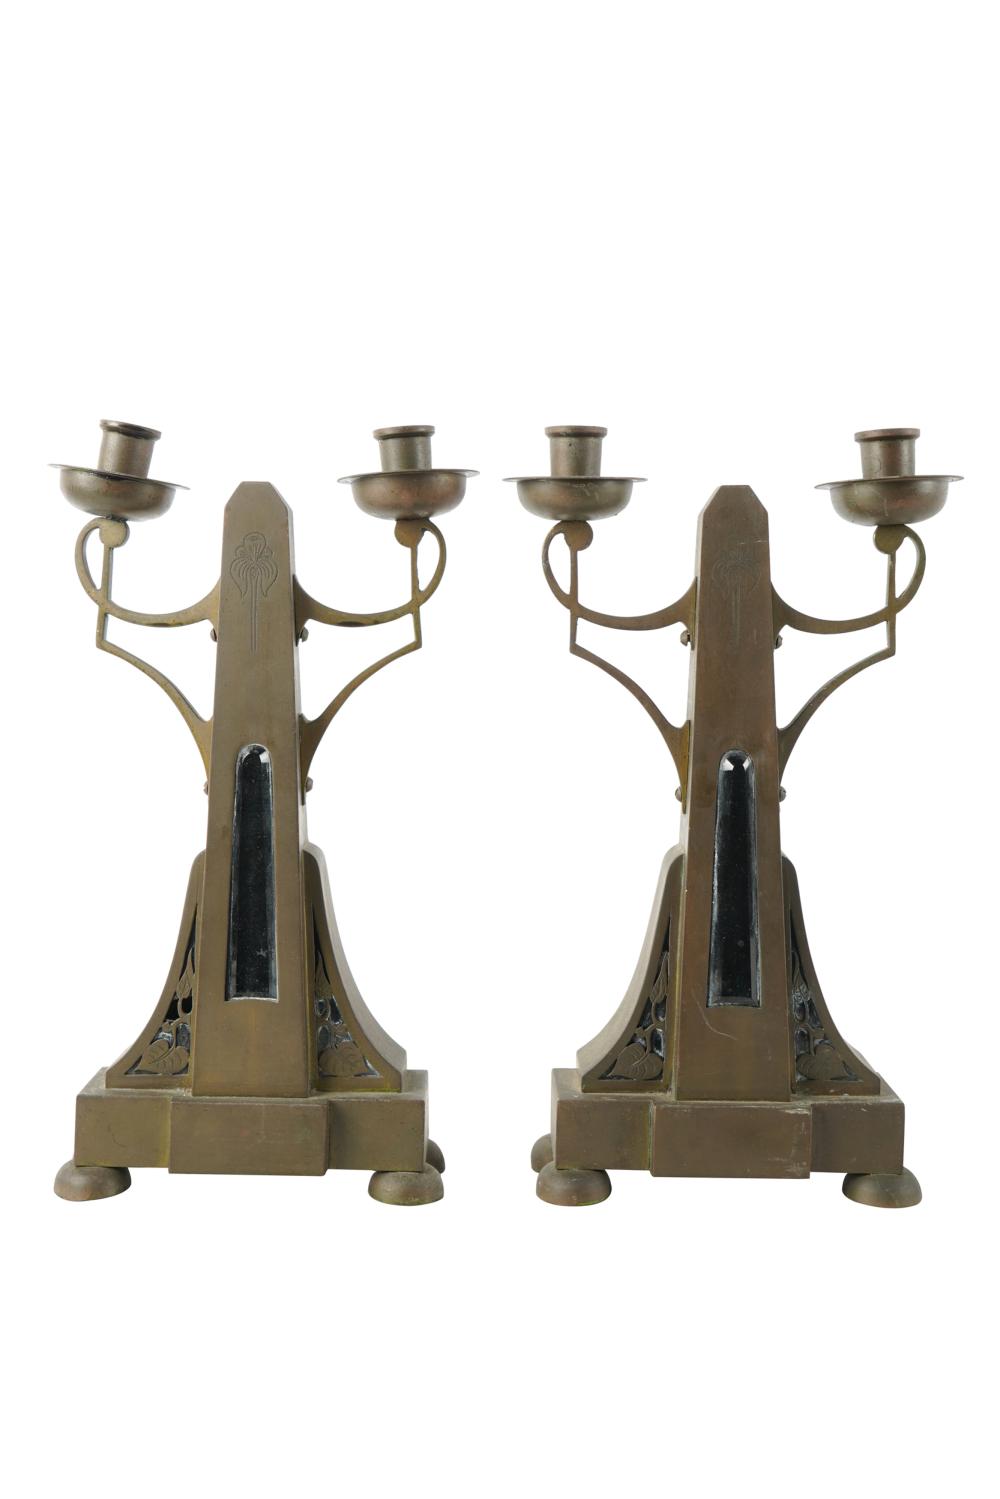 PAIR OF ARTS CRAFTS STYLE TWIN LIGHT 332e34